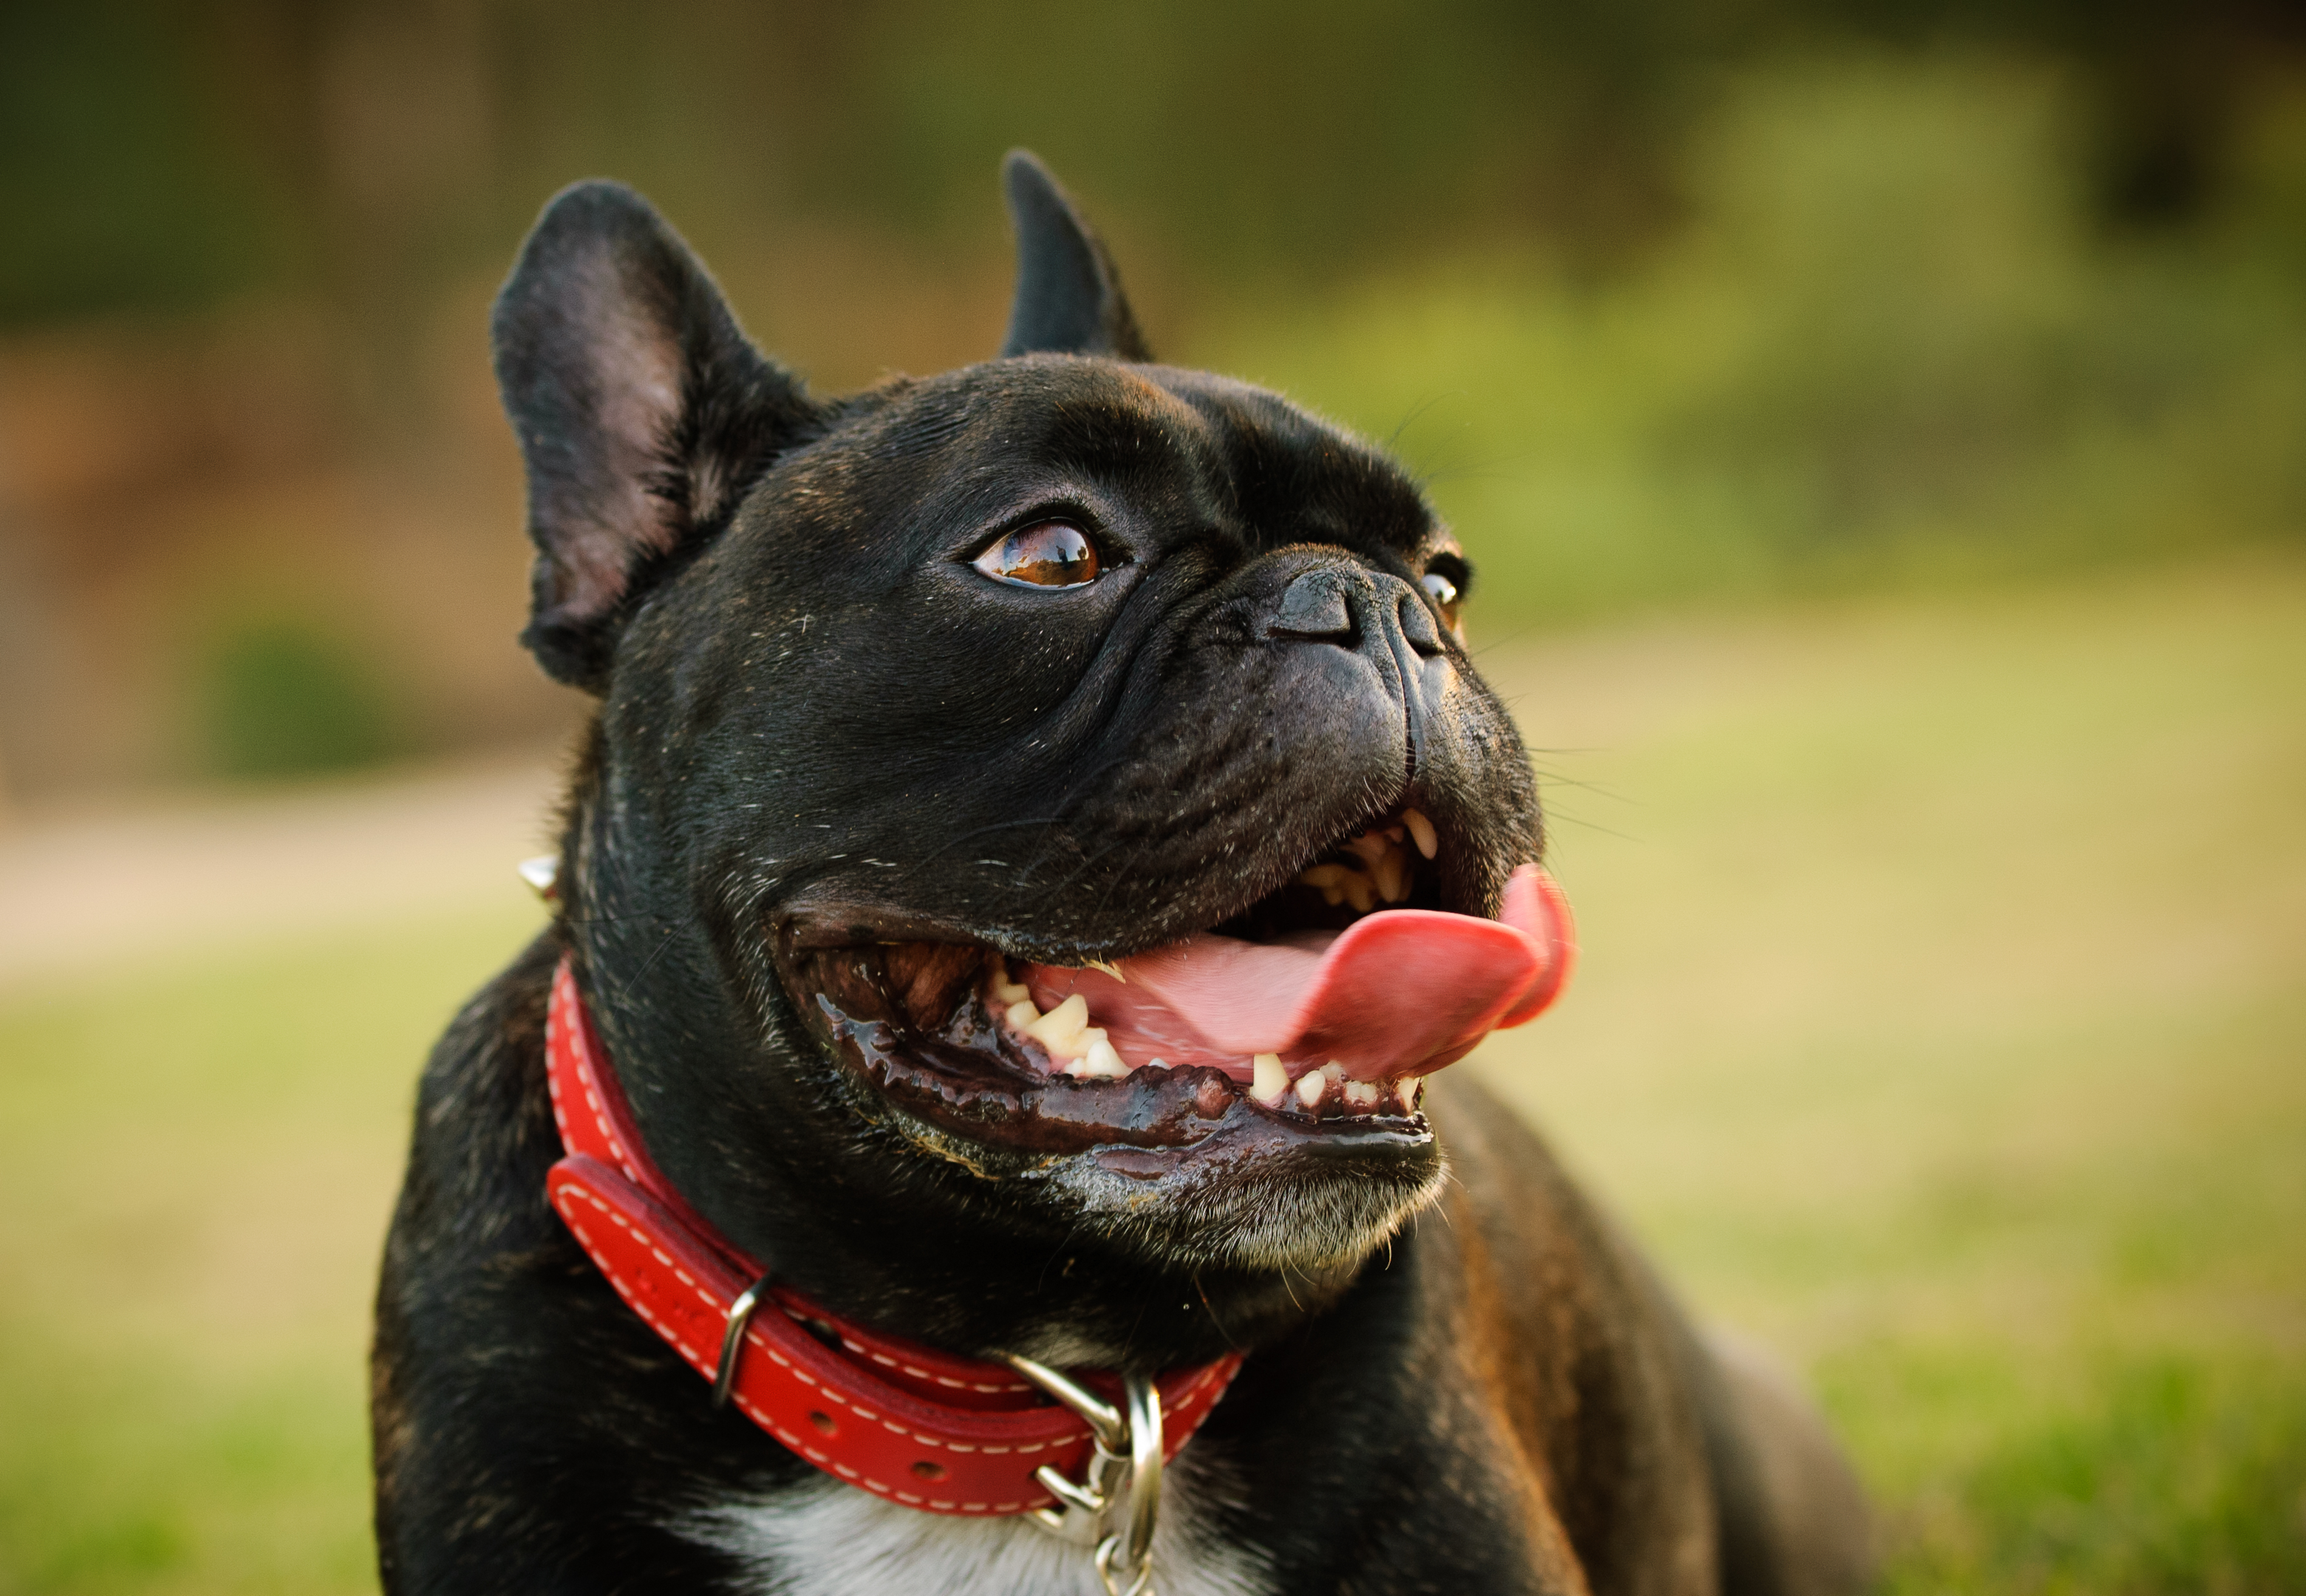 When a dog is overheating the tongue will furl up and a dog's ability to cool down further are compromised. 